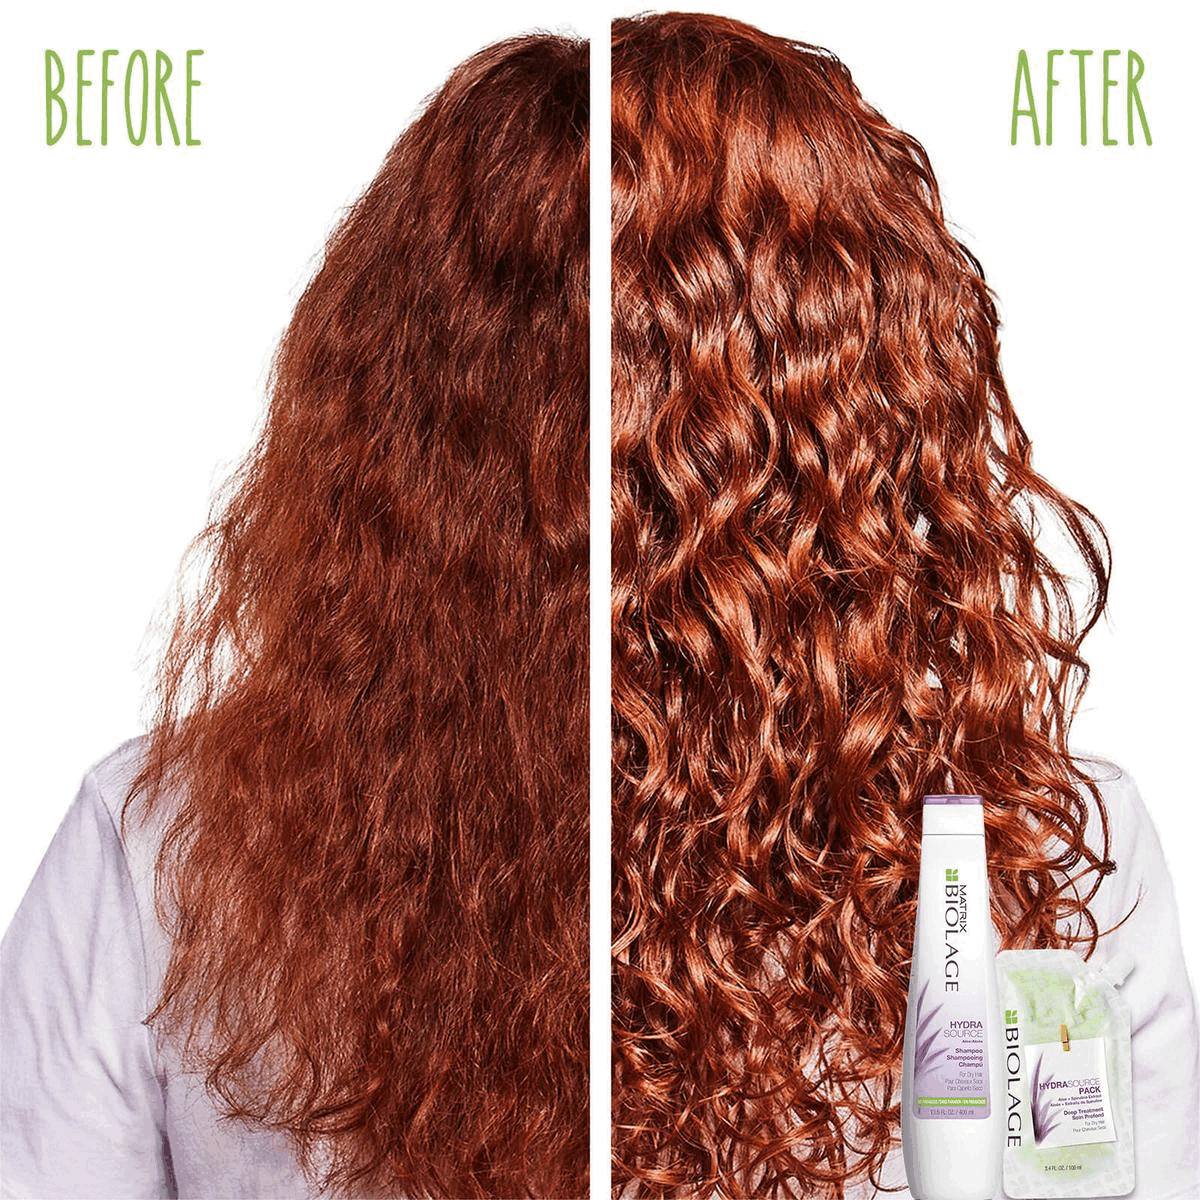 Before and after shot. Shampoo Review. Build Your regimen. Jenny Rey Global ambassador advice on how to use the product.